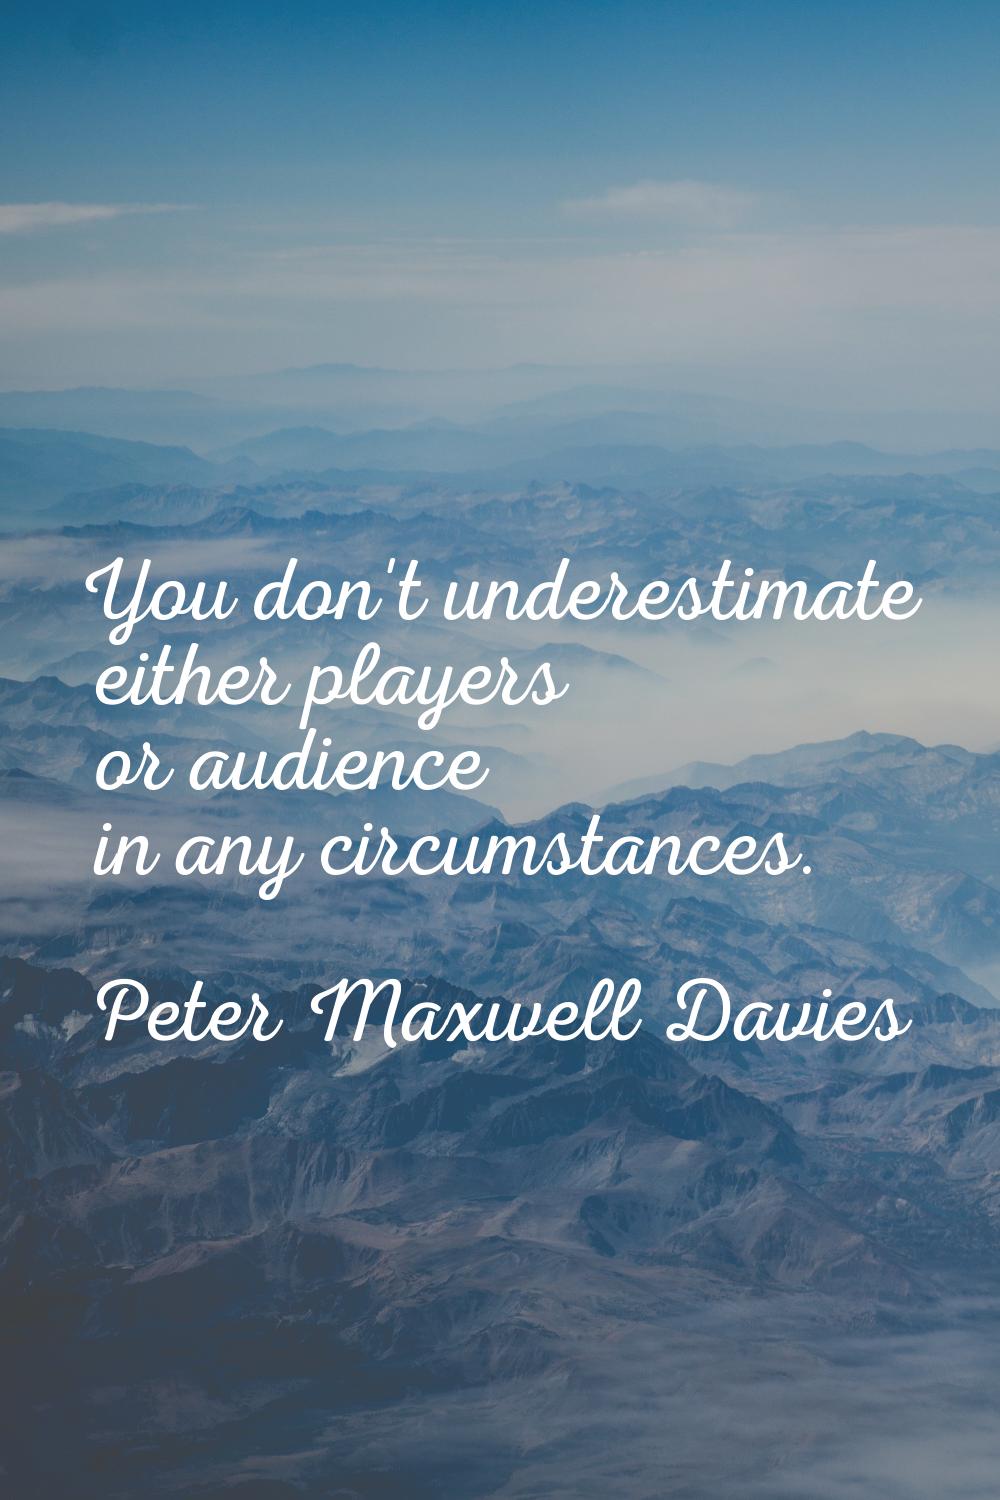 You don't underestimate either players or audience in any circumstances.